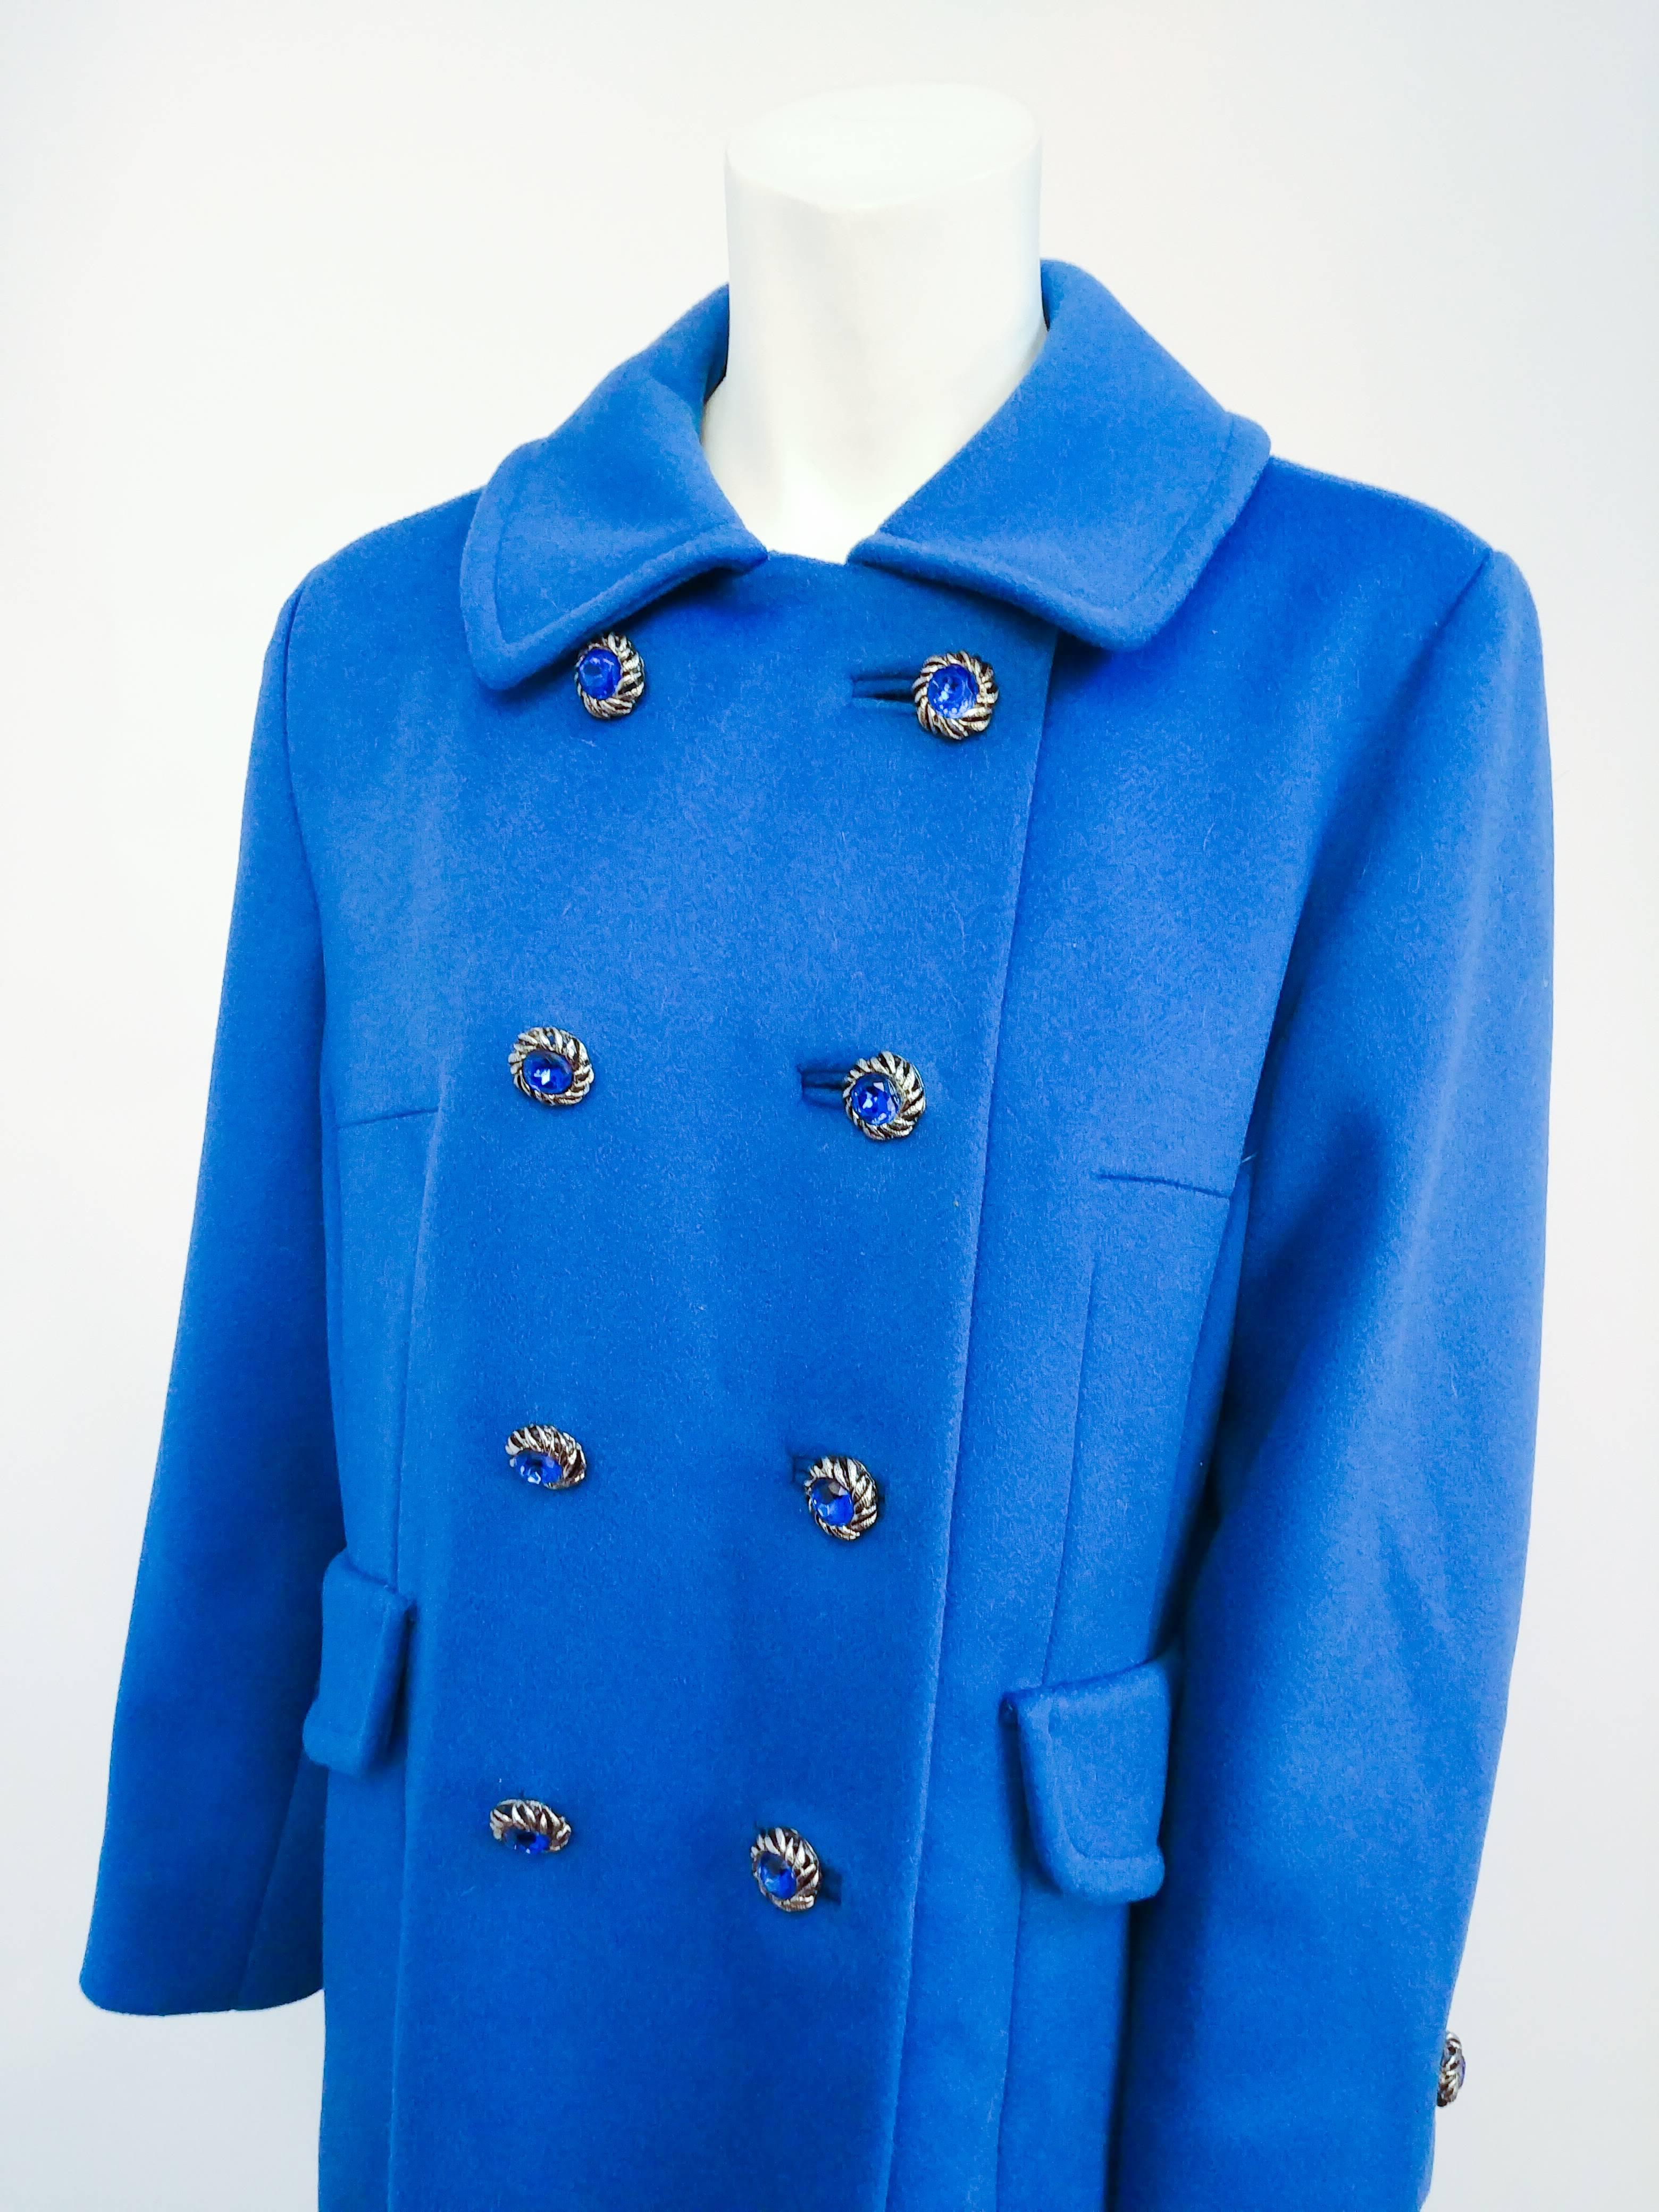 1960s Cobalt Blue Cashmere Wool Coat. Large decorative jeweled buttons. Double breasted, two front pockets. 